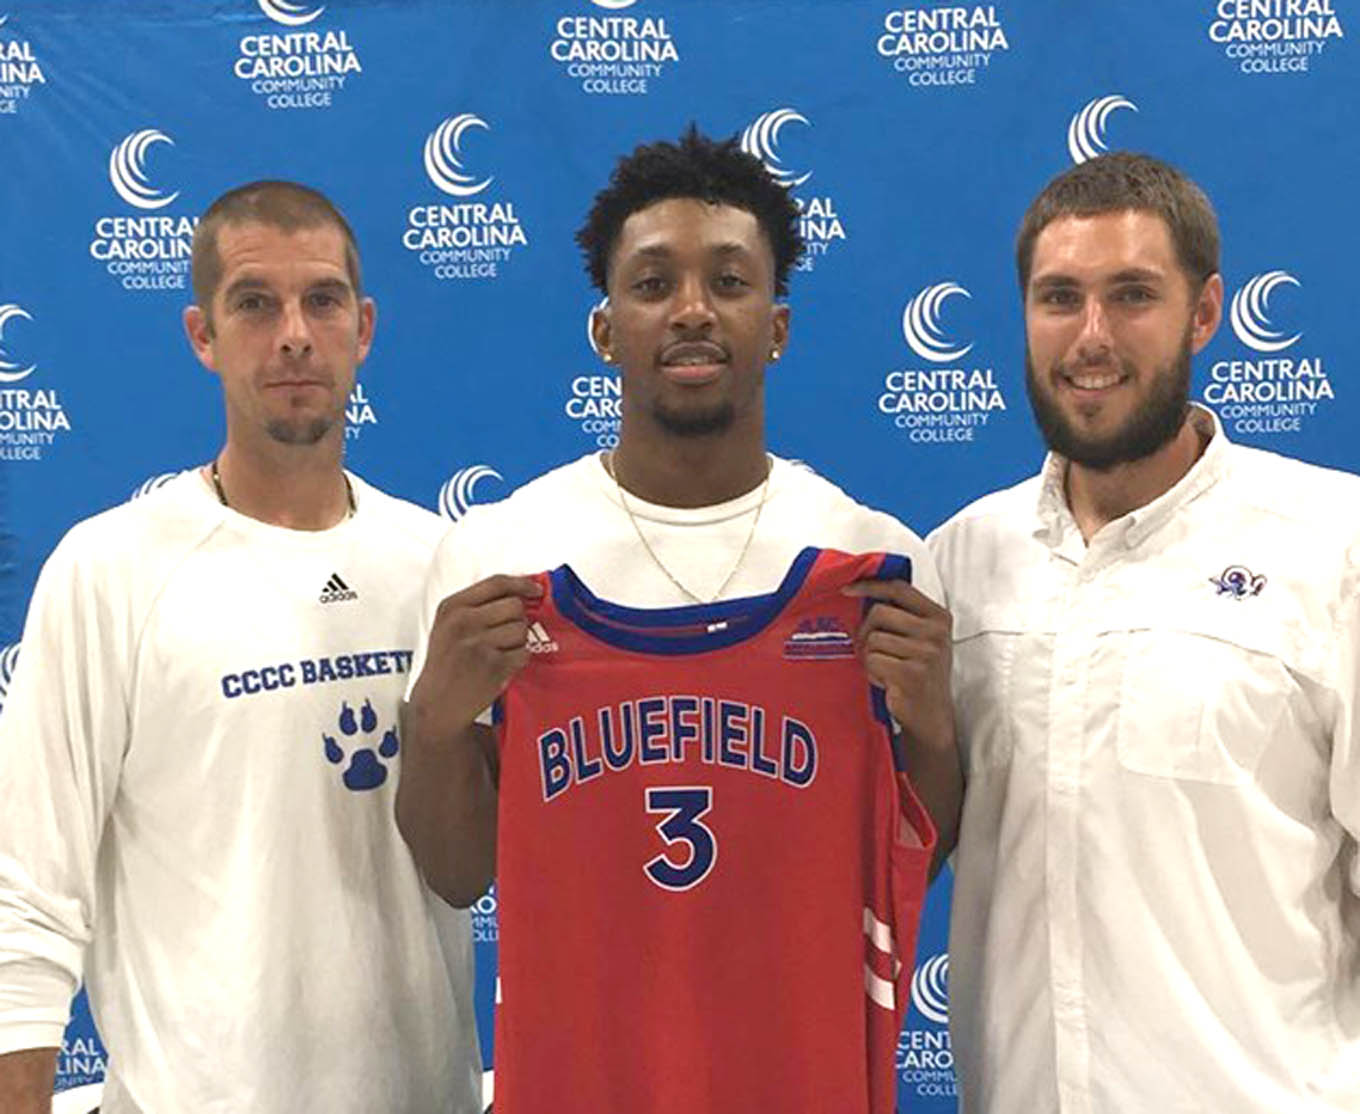 Click to enlarge,  Chris George (center), who was the Most Outstanding Sophomore on the Central Carolina Community College 2018-19 men's basketball team, has signed to play with Bluefield College in Bluefield, Va. George, a 6-foot-3 forward who played at Cape Fear High School in Cumberland County, averaged 11.2 points and 7.9 rebounds per game for the CCCC Cougars. Pictured with George are Central Carolina Community College Men's Basketball Coach Brad McDougald (left) and Bluefield College Assistant Coach Ryan Moody (right). Coach McDougald said of George: "Chris has been a fantastic young man his two years here. Chris has done all the right things, and is a positive influence to those around him.  He embodies what Cougar basketball is all about. It's been an absolute privilege to coach him and have him as part of this program." 